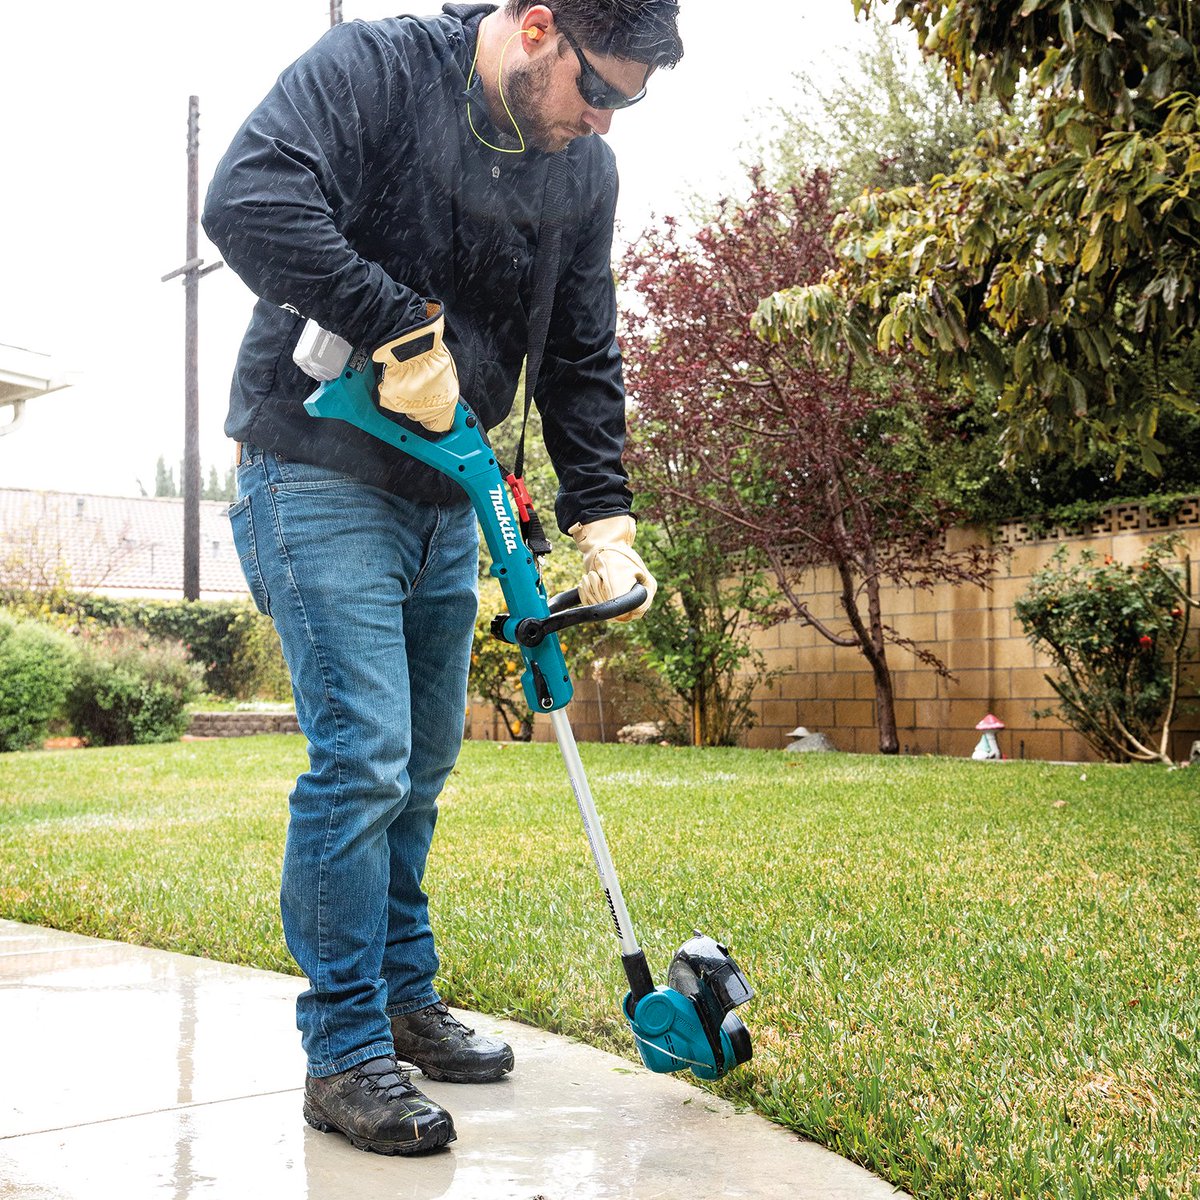 With zero emissions, lower noise, & less maintenance, the 18V LXT® String Trimmer (XRU24) is a welcome solution for landscapers. It is ideal for precision trimming and edging with an efficient Makita-built motor for longer run time. #makitatools #makita…